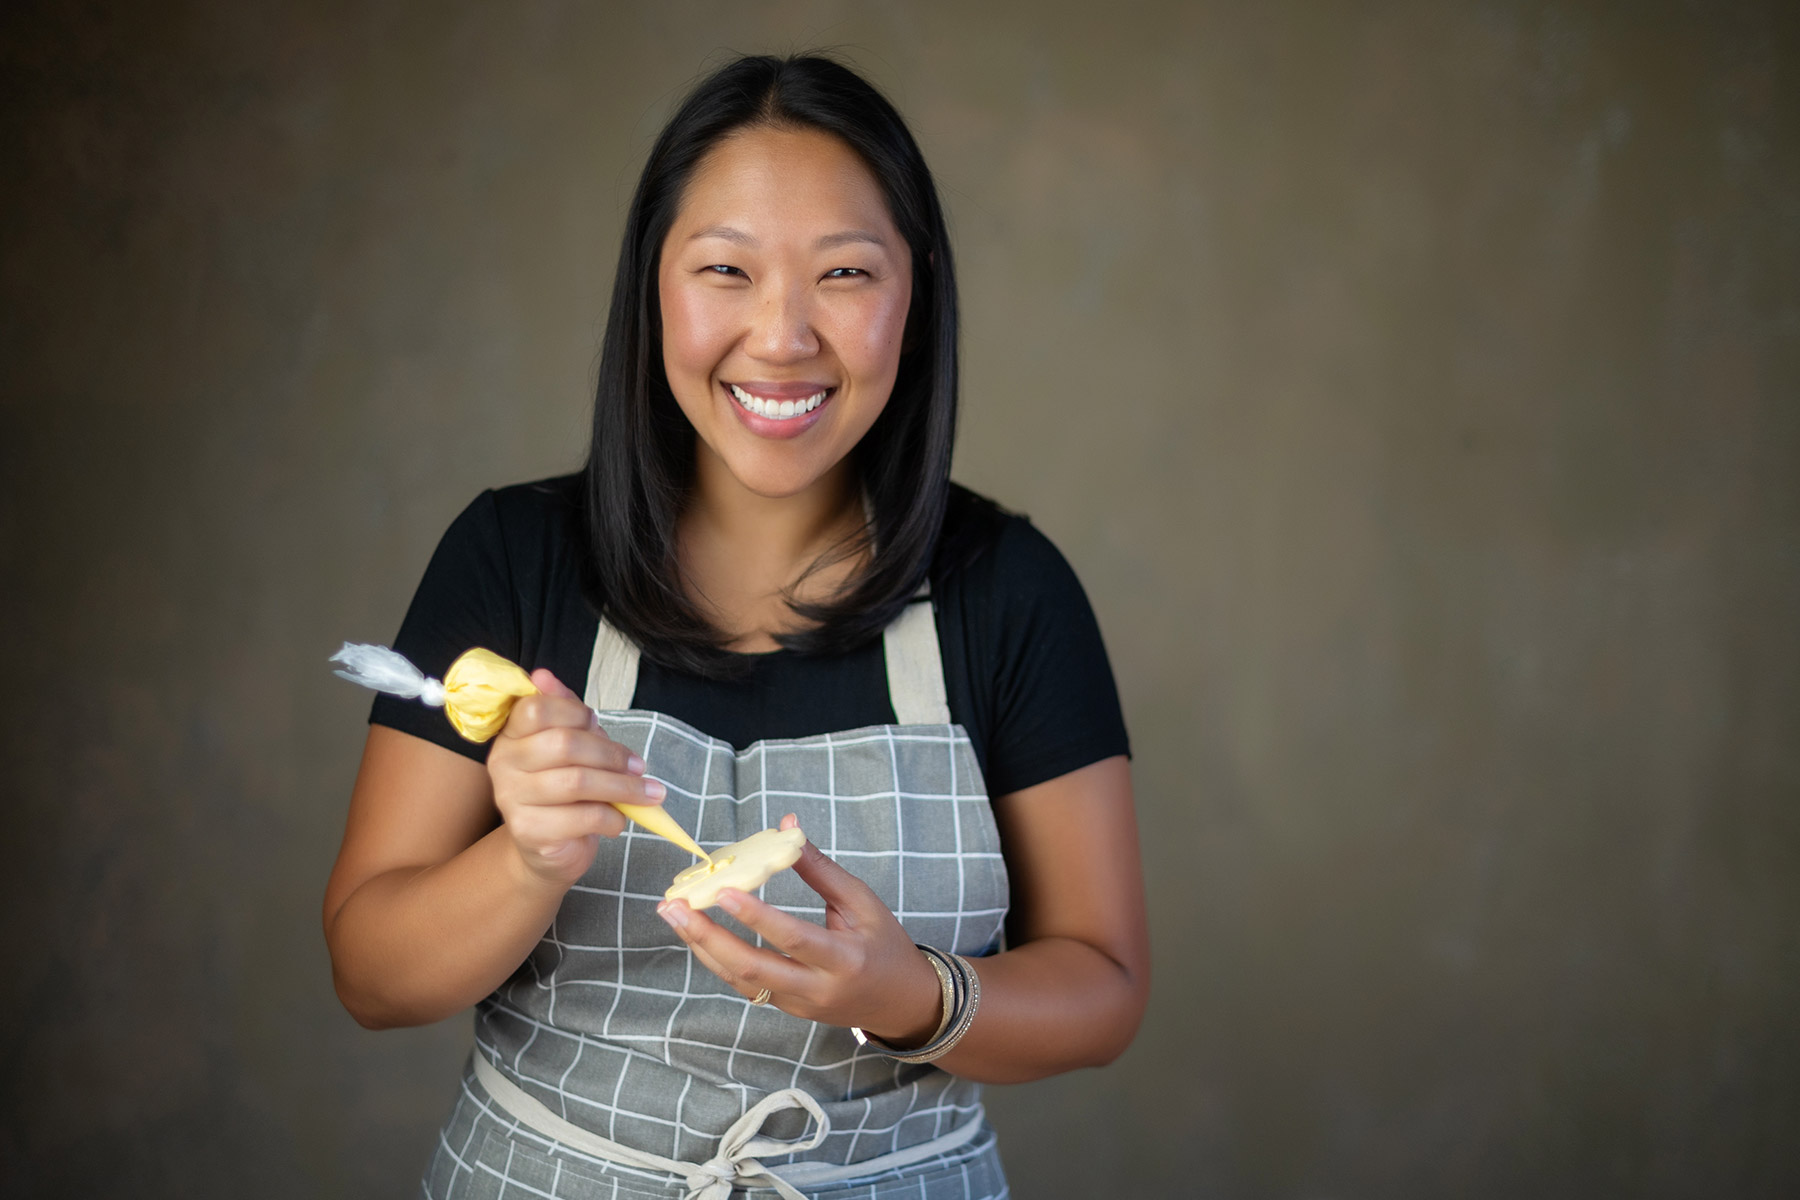 Becca Cairns of Enjoy LLC with a cookie and yellow frosting tube against a brownish background